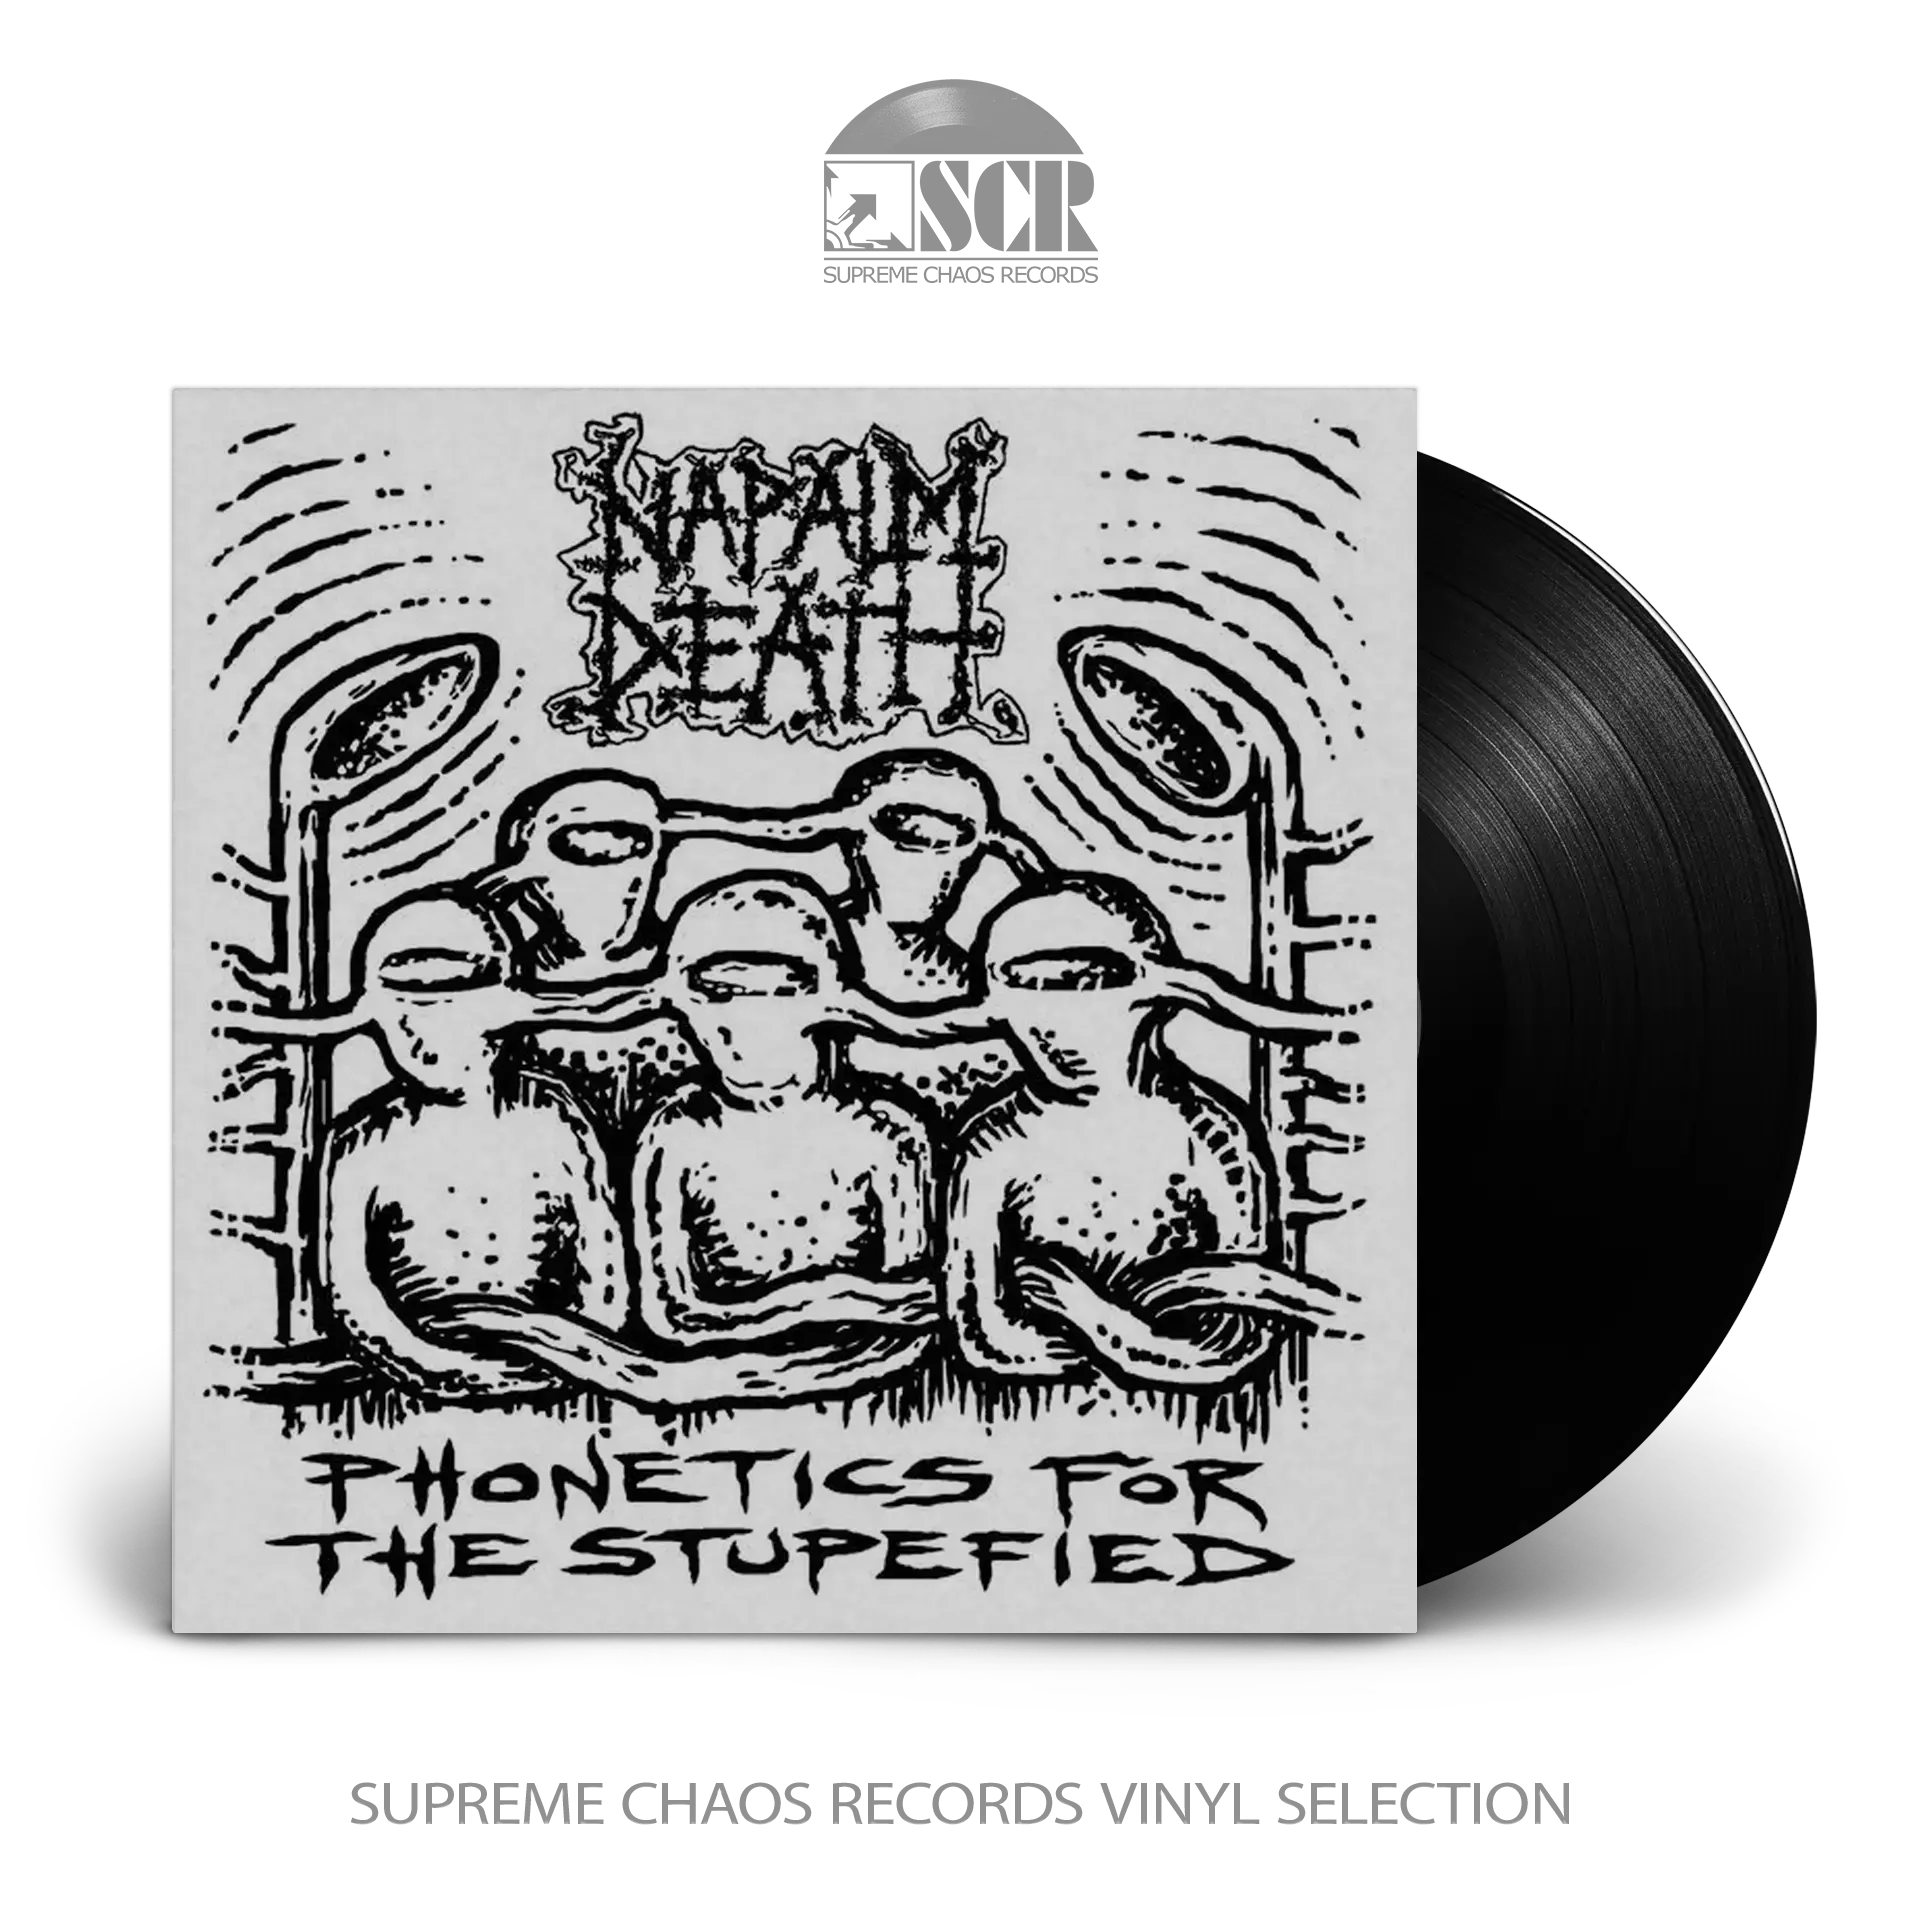 VOÏVOD / NAPALM DEATH - Forever Mountain / Phonetics For The Stupefied [BLACK 7" EP]